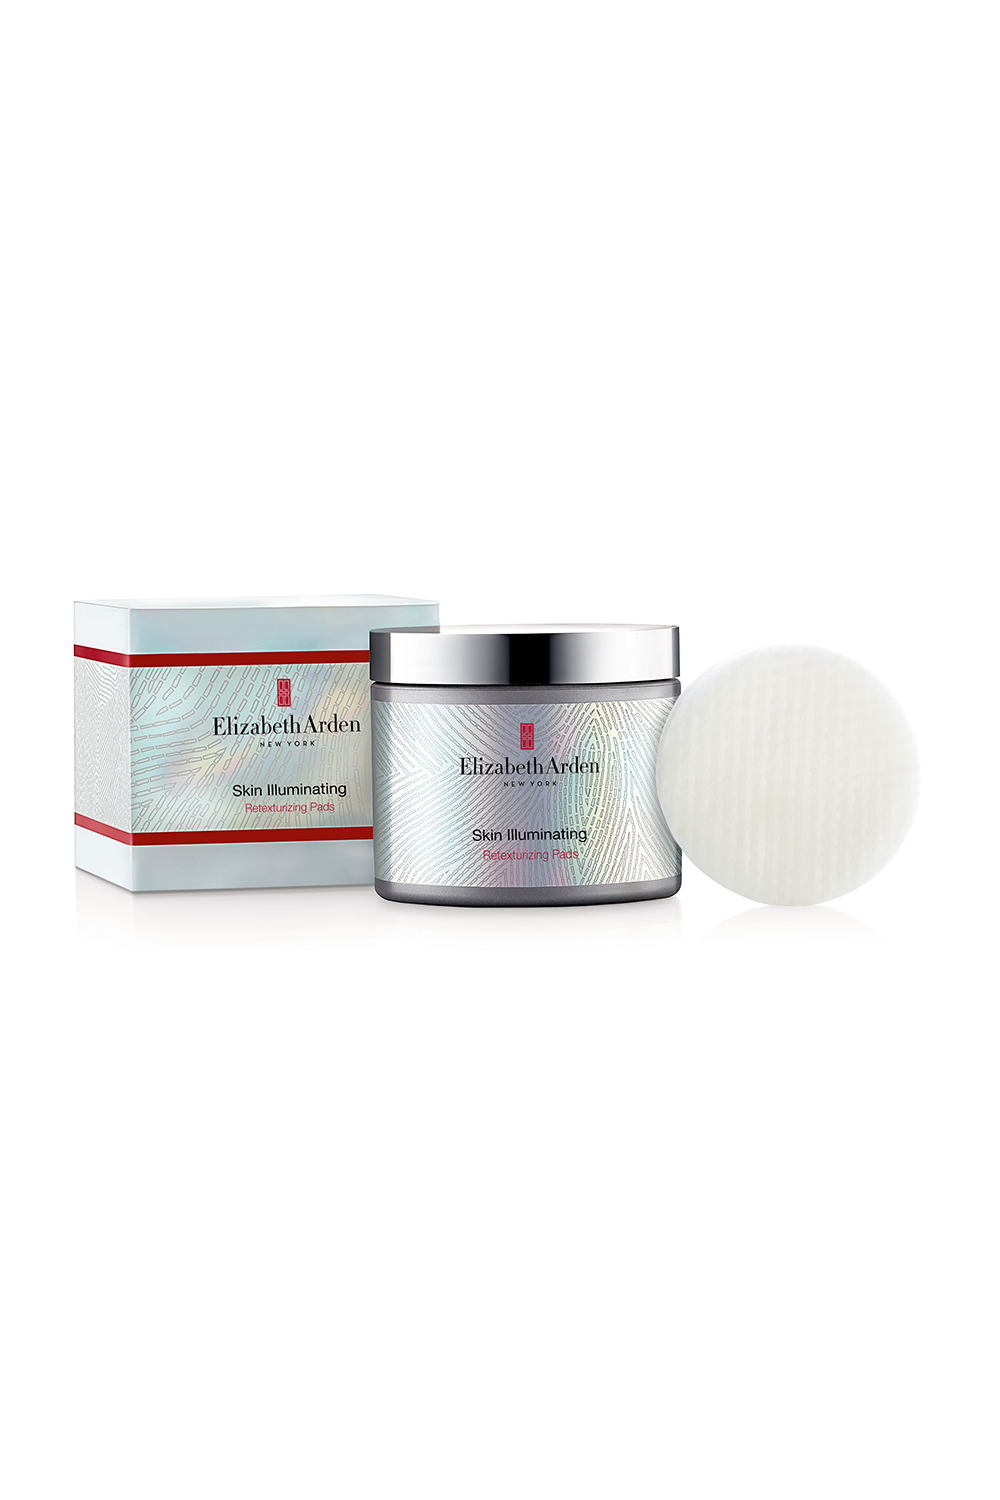 The re-surfacer: Used three times a week after cleansing, Elizabeth Arden Skin Illuminating Retexturising Pads, $79.50, (50 pads), wipe away dulling, dead skin cells using the power of 5% glycolic acid.